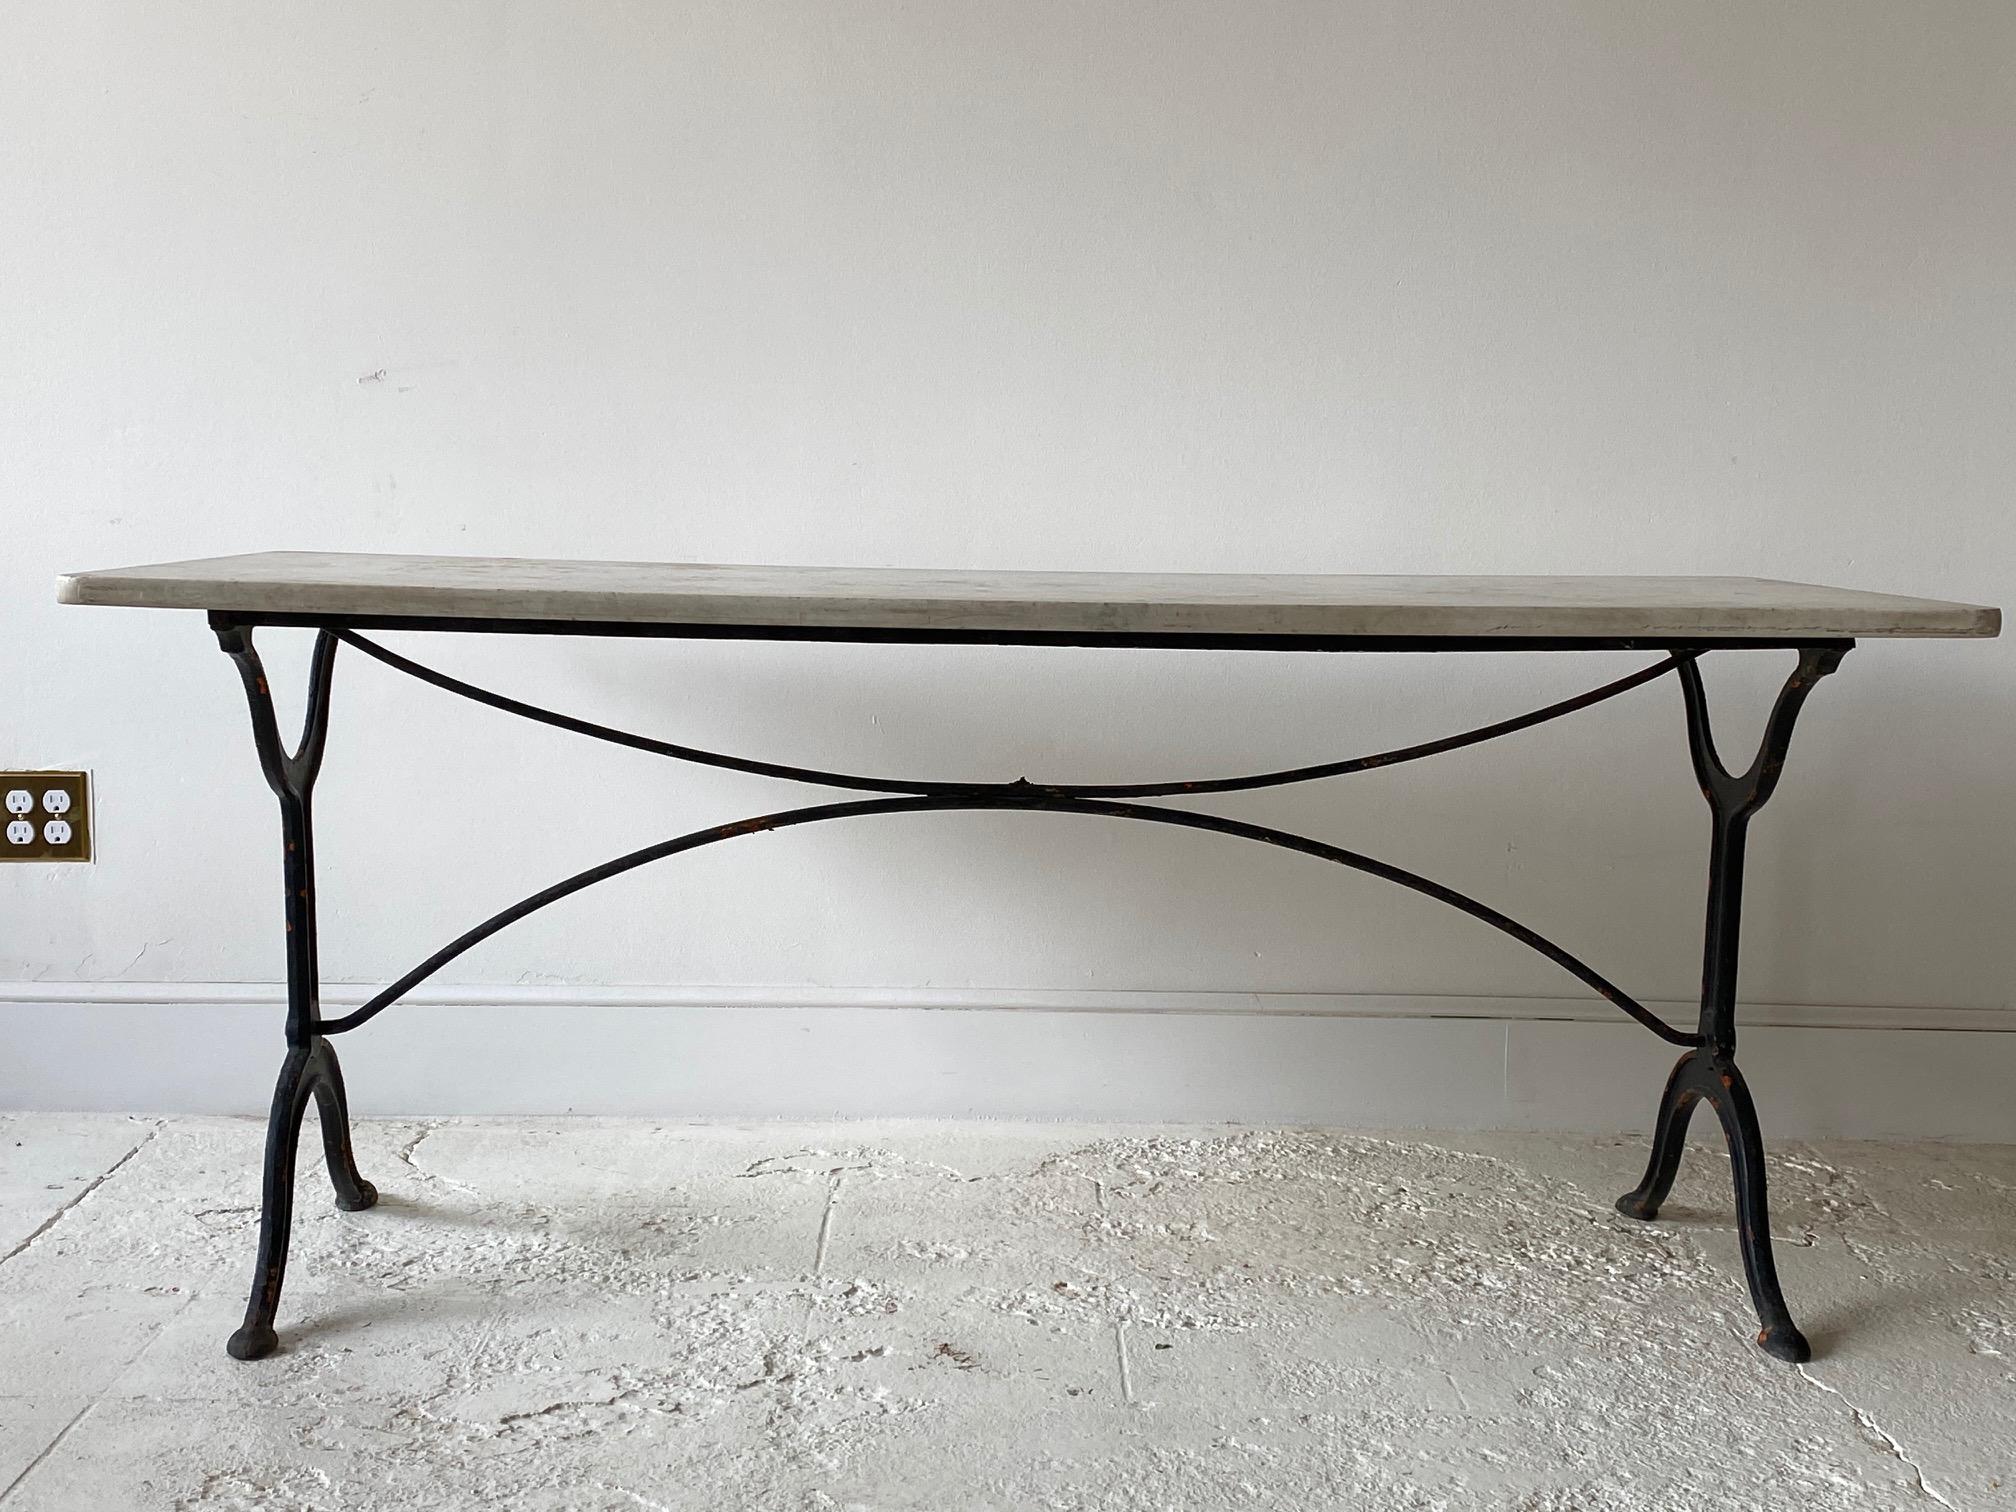 French rectangular wrought iron garden table with marble top.